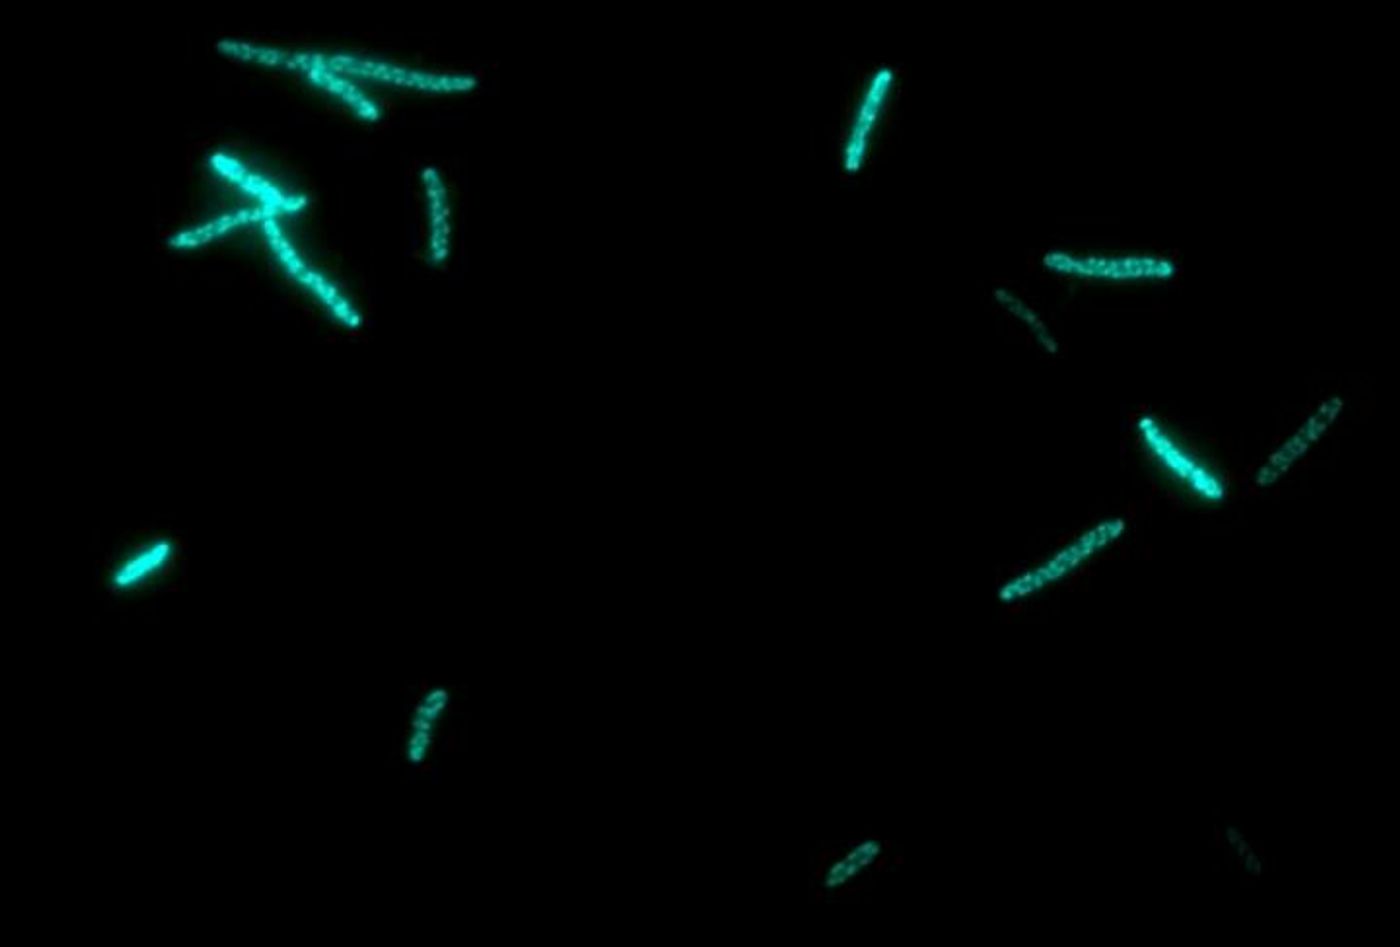 These are factories of E. coli bacteria, producing P450, bound to green fluorescent protein. / Credit: DTU